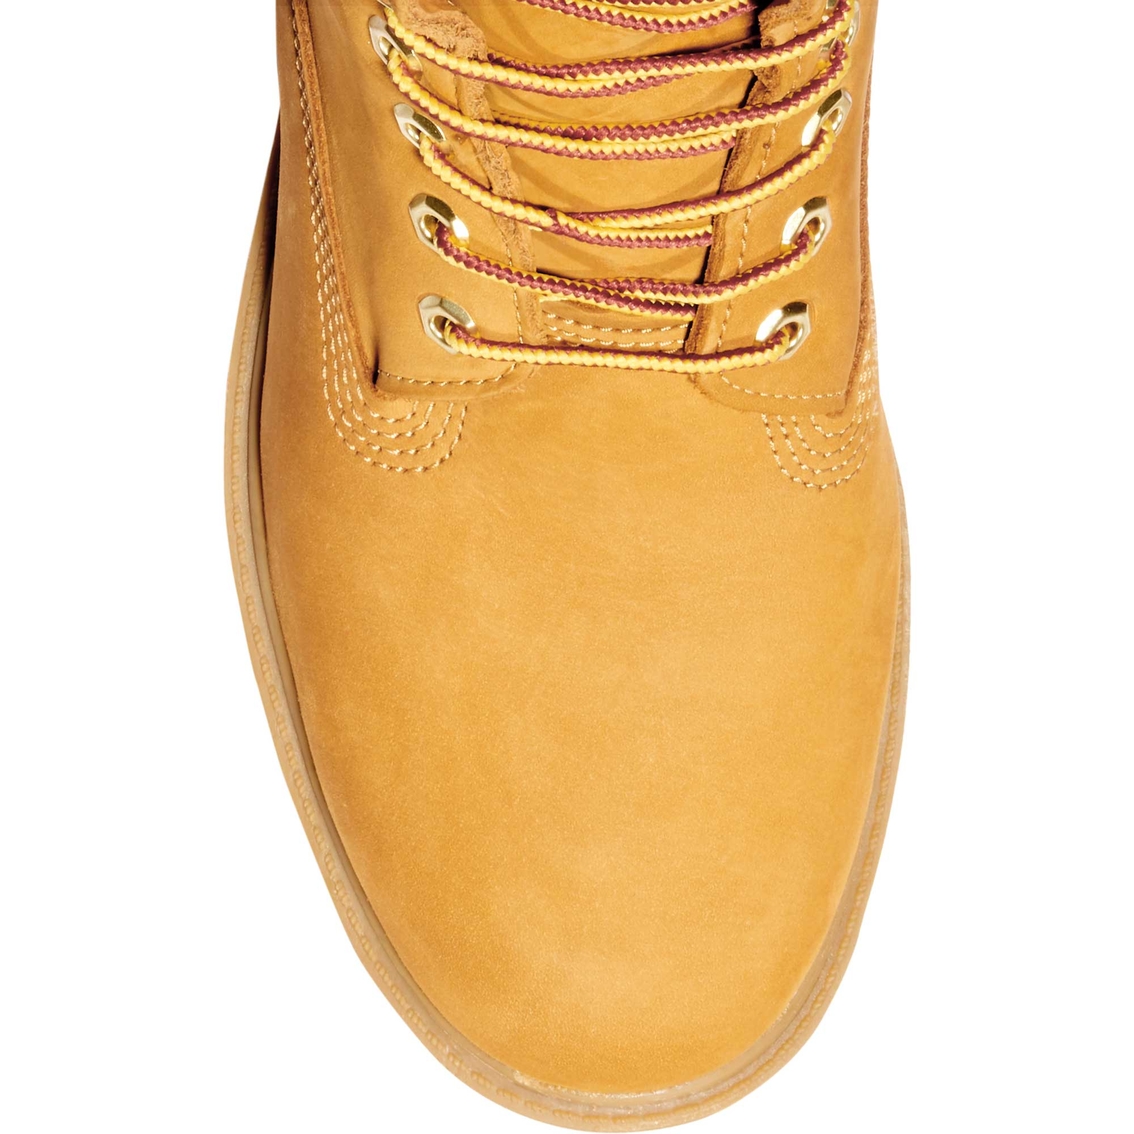 Timberland Classic 6 in. Boots - Image 4 of 7